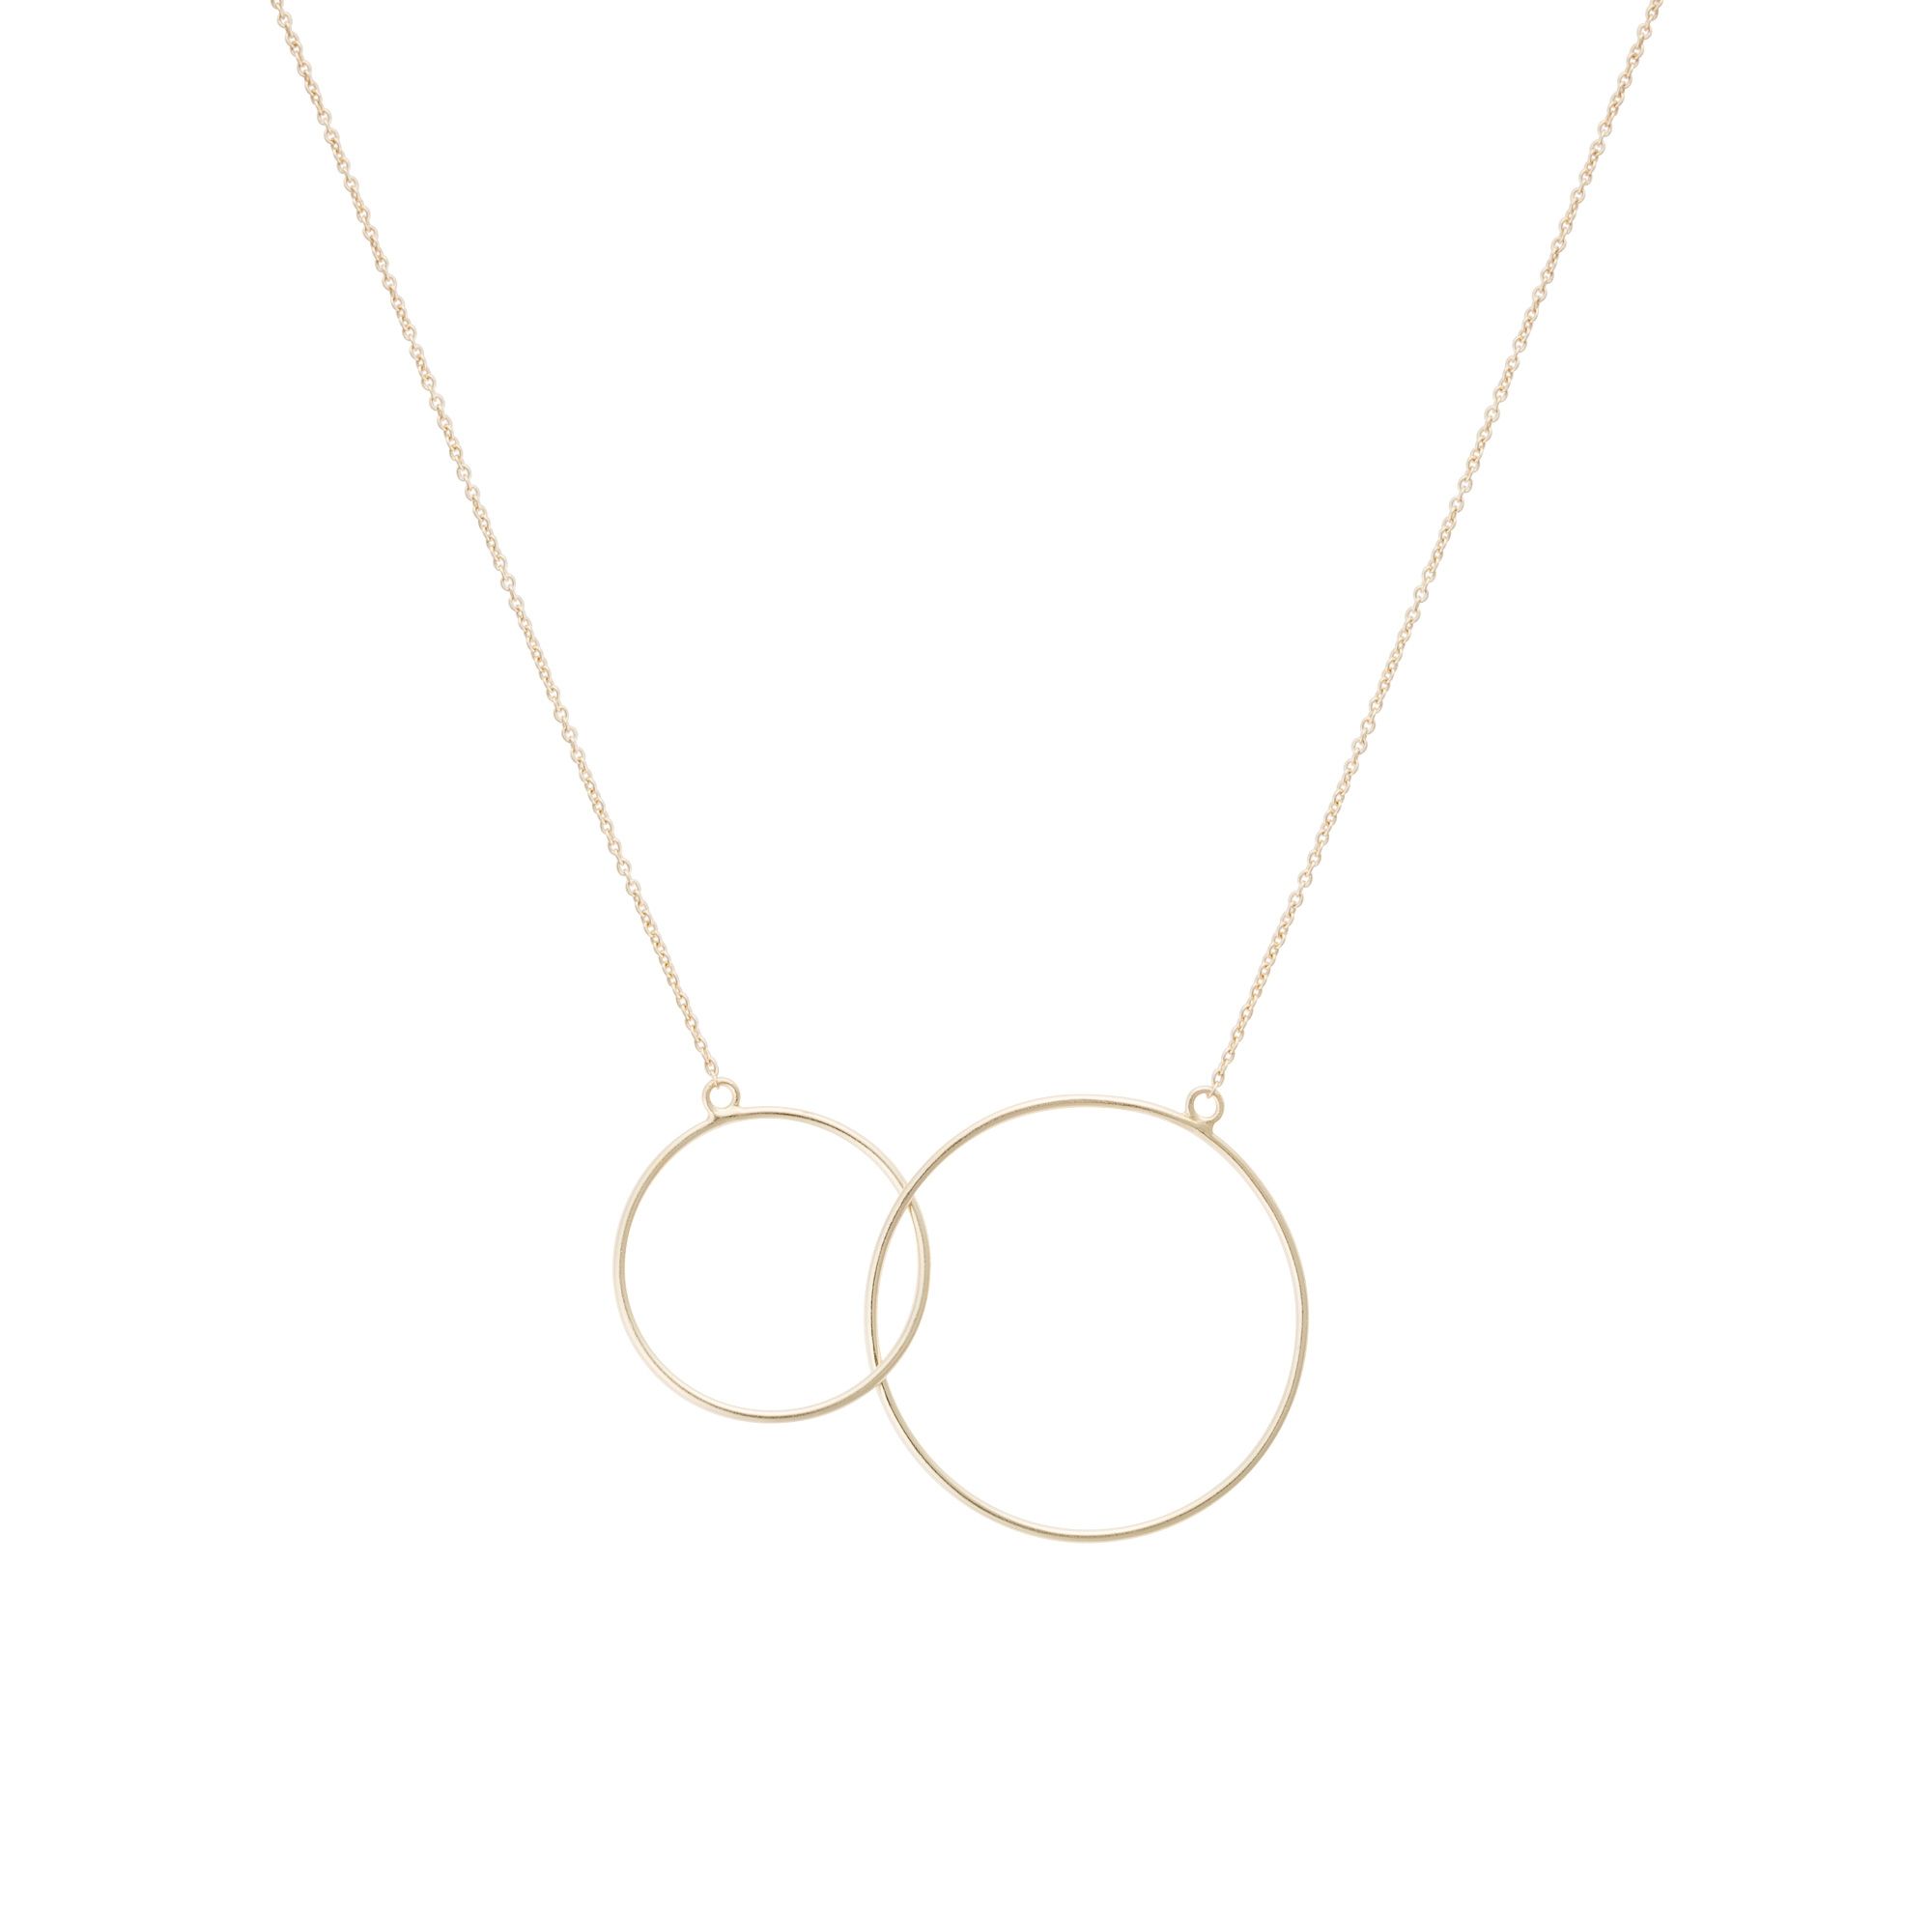 Oliver Bonas Women Dawn Silver & Gold Plated Pendant Necklace 